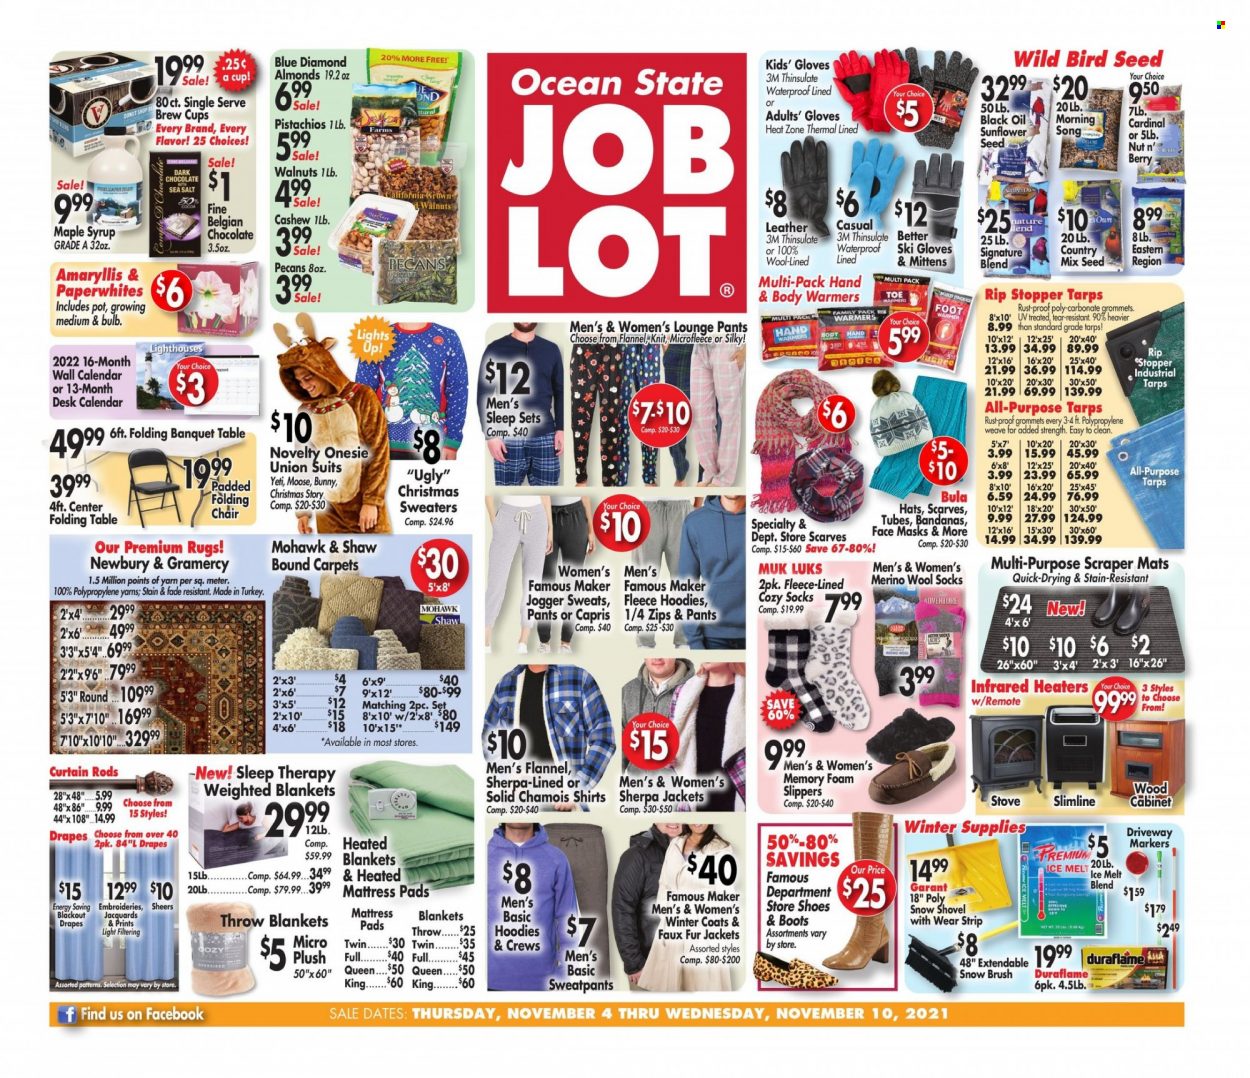 thumbnail - Ocean State Job Lot Flyer - 11/04/2021 - 11/10/2021 - Sales products - boots, shoes, slippers, chocolate, donut, UglyDolls, dark chocolate, sea salt, oil, maple syrup, syrup, almonds, walnuts, pecans, pistachios, Blue Diamond, pot, calendar, bulb, blanket, mattress protector, curtain, hoodie, animal food, bird food, plant seeds, coat, jacket, winter coat, pants, shirt, sherpa, sweatpants, socks, wool socks, scarf, hat, tarps, stove, blackout, rug, shovel, snow shovel, face mask, cabinet, table, folding table, ice melter, curtain rod. Page 1.